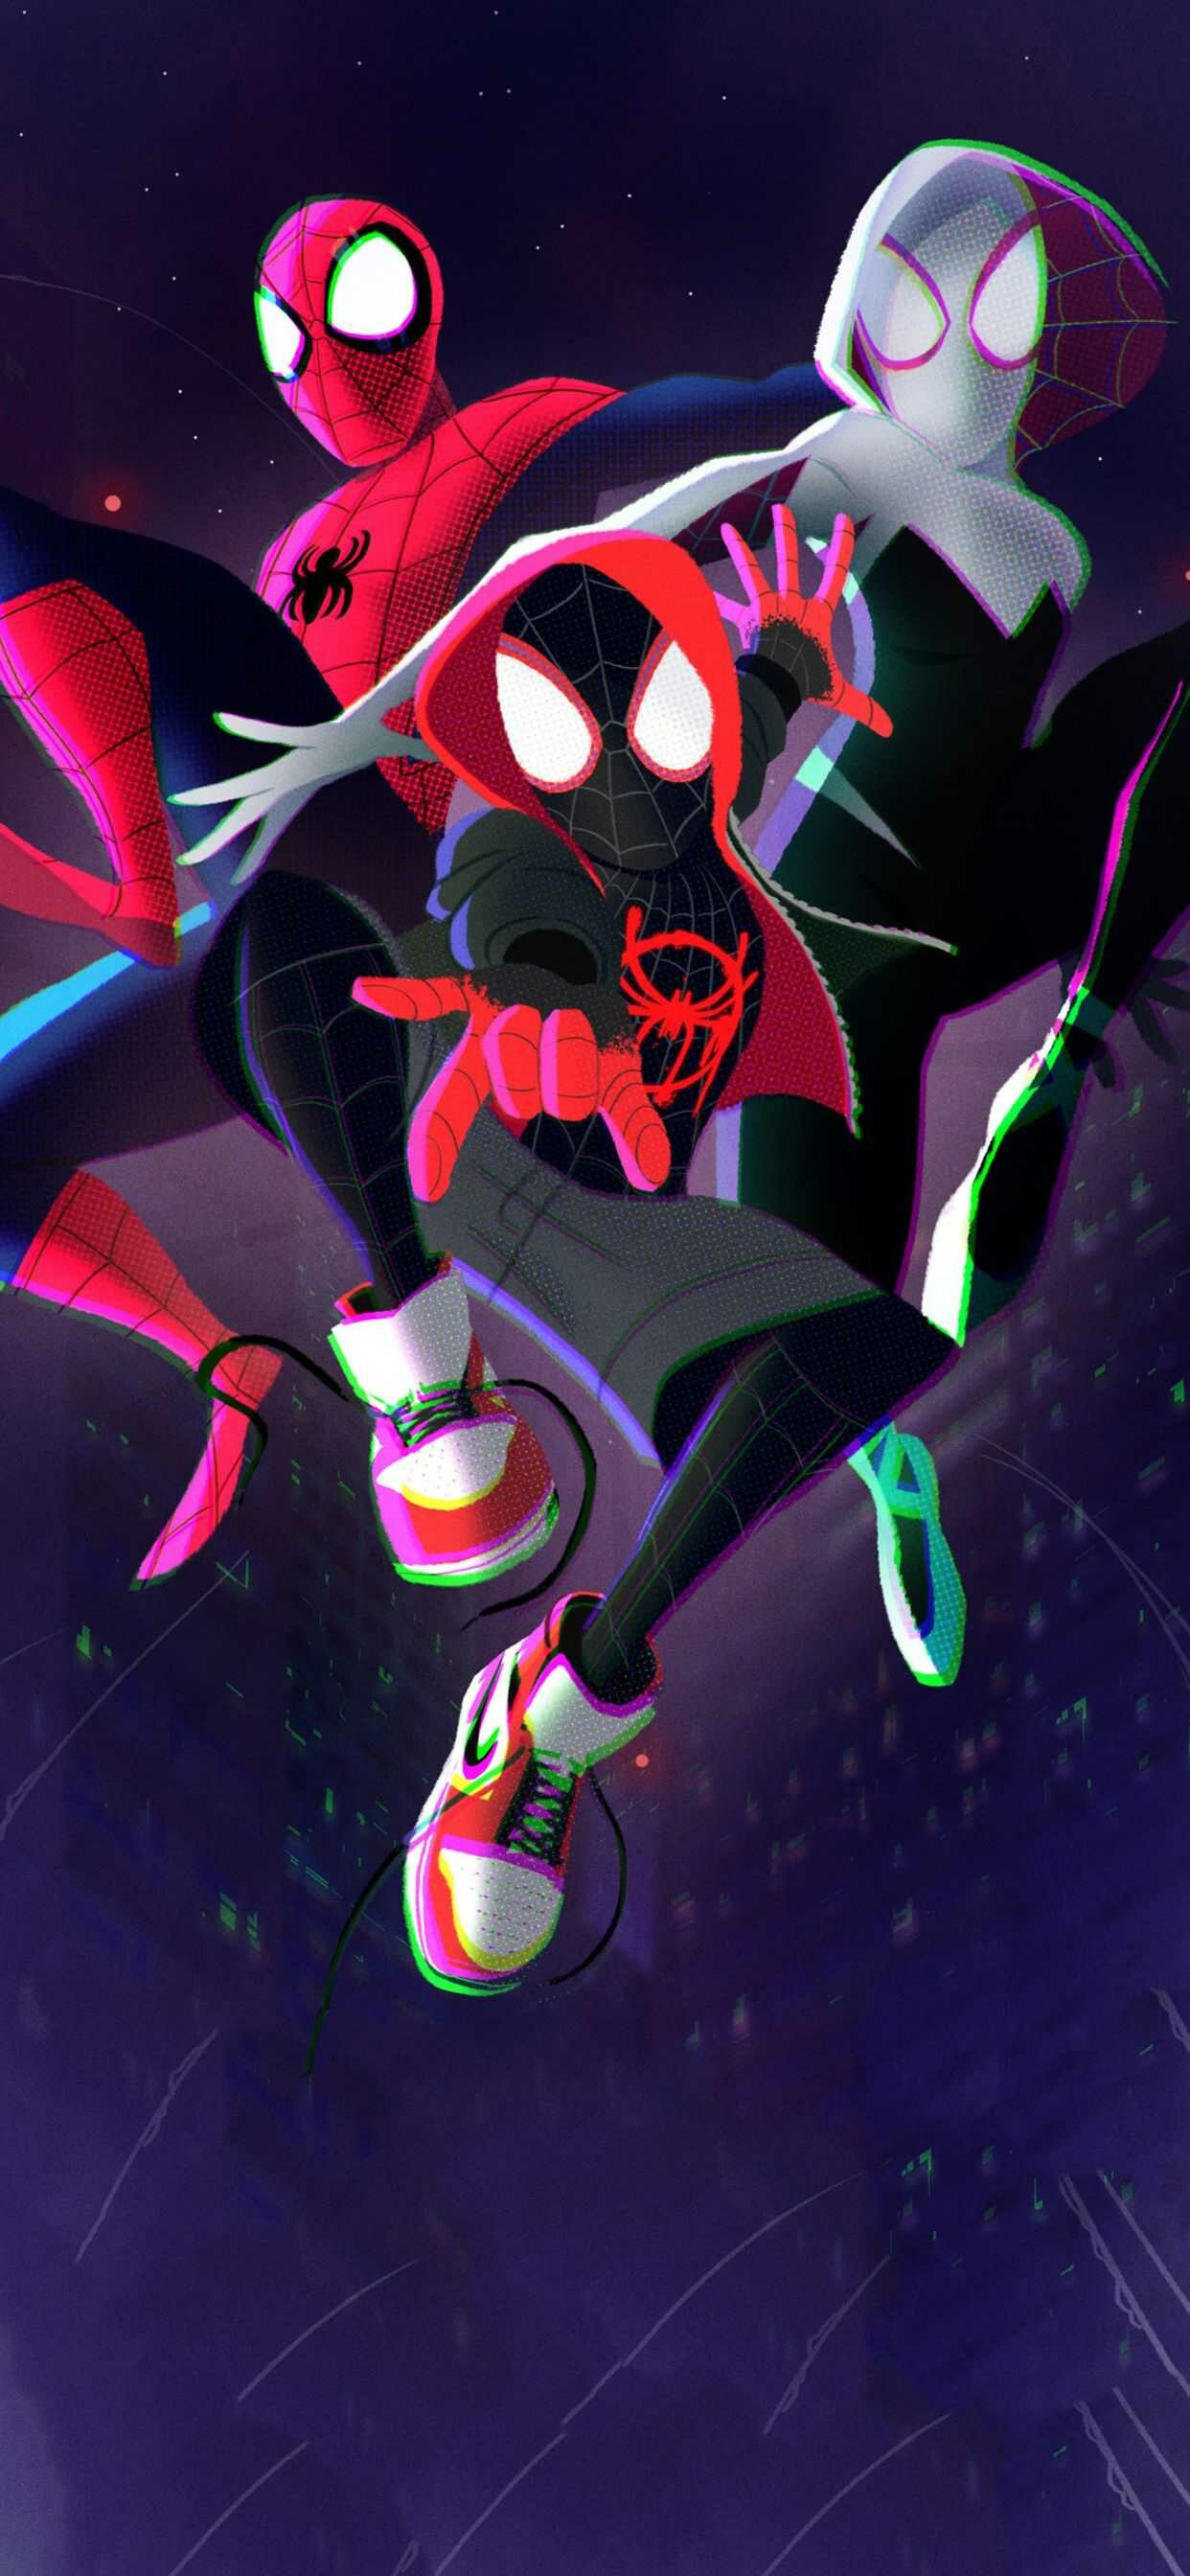 Spider-Man: Into the Spider-Verse: The film was originally set to feature a romance between Miles Morales and Spider-Gwen. 1250x2690 HD Wallpaper.